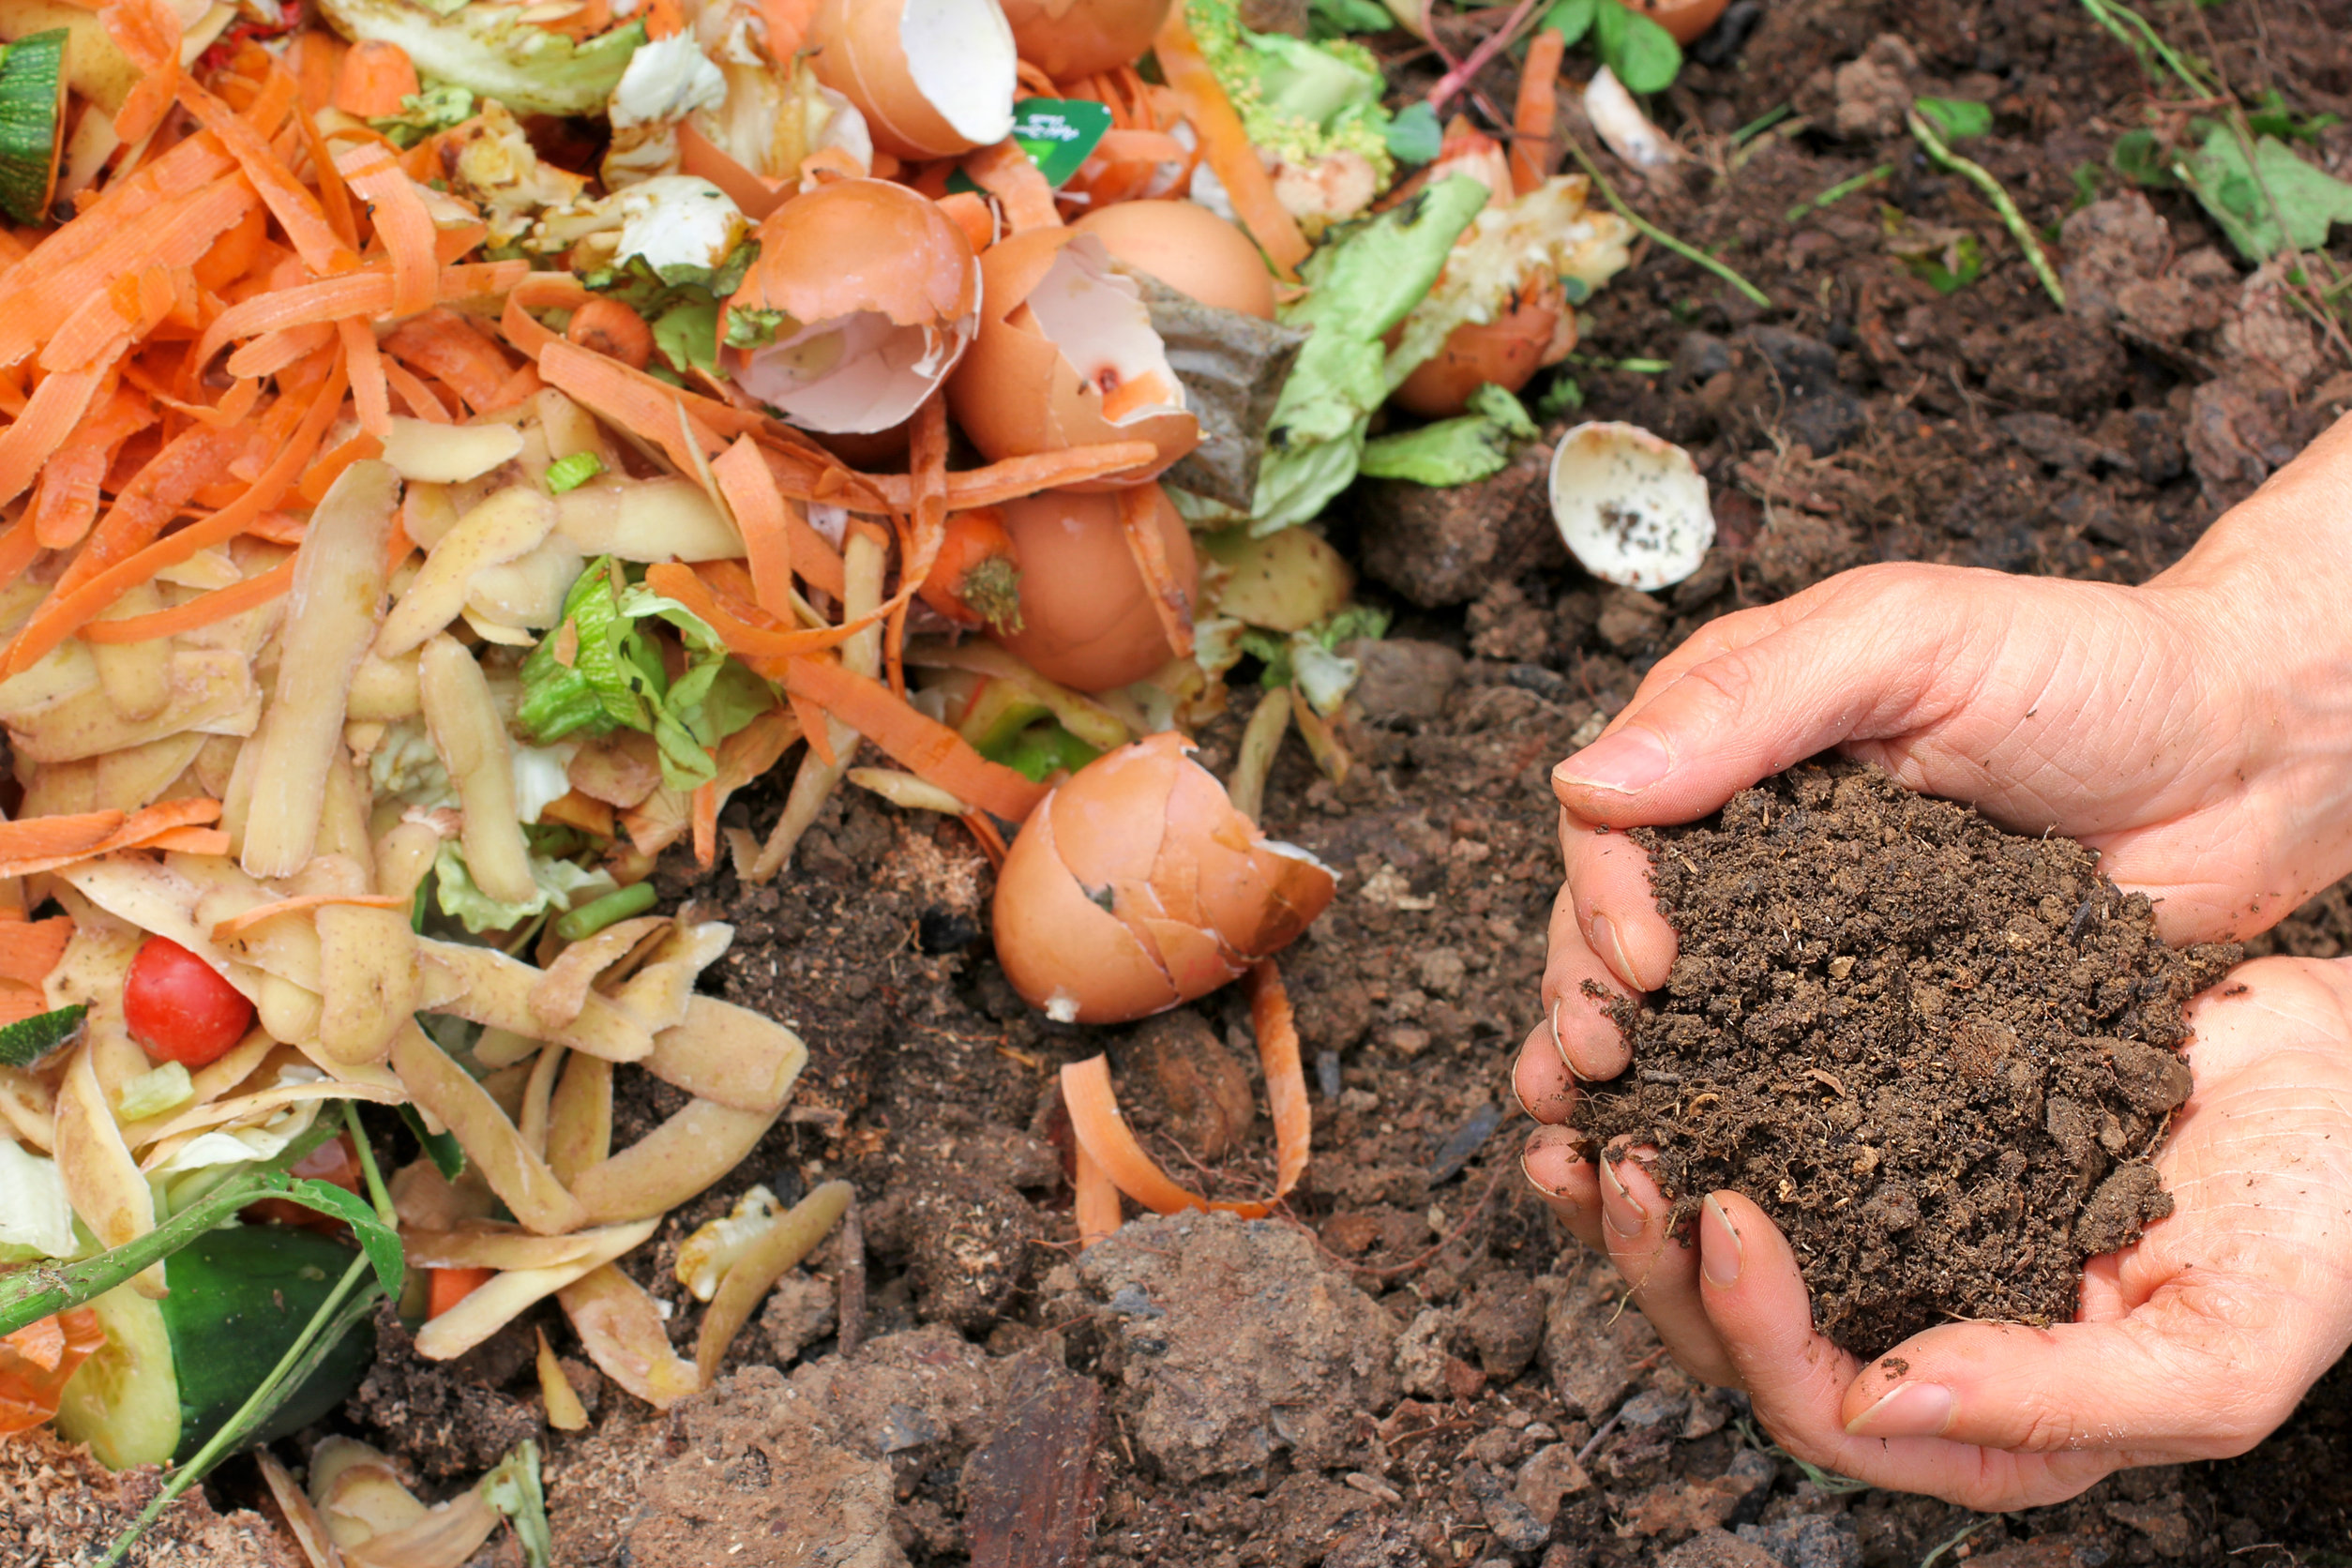 How To Compost At Home: The Do’s And Don’ts